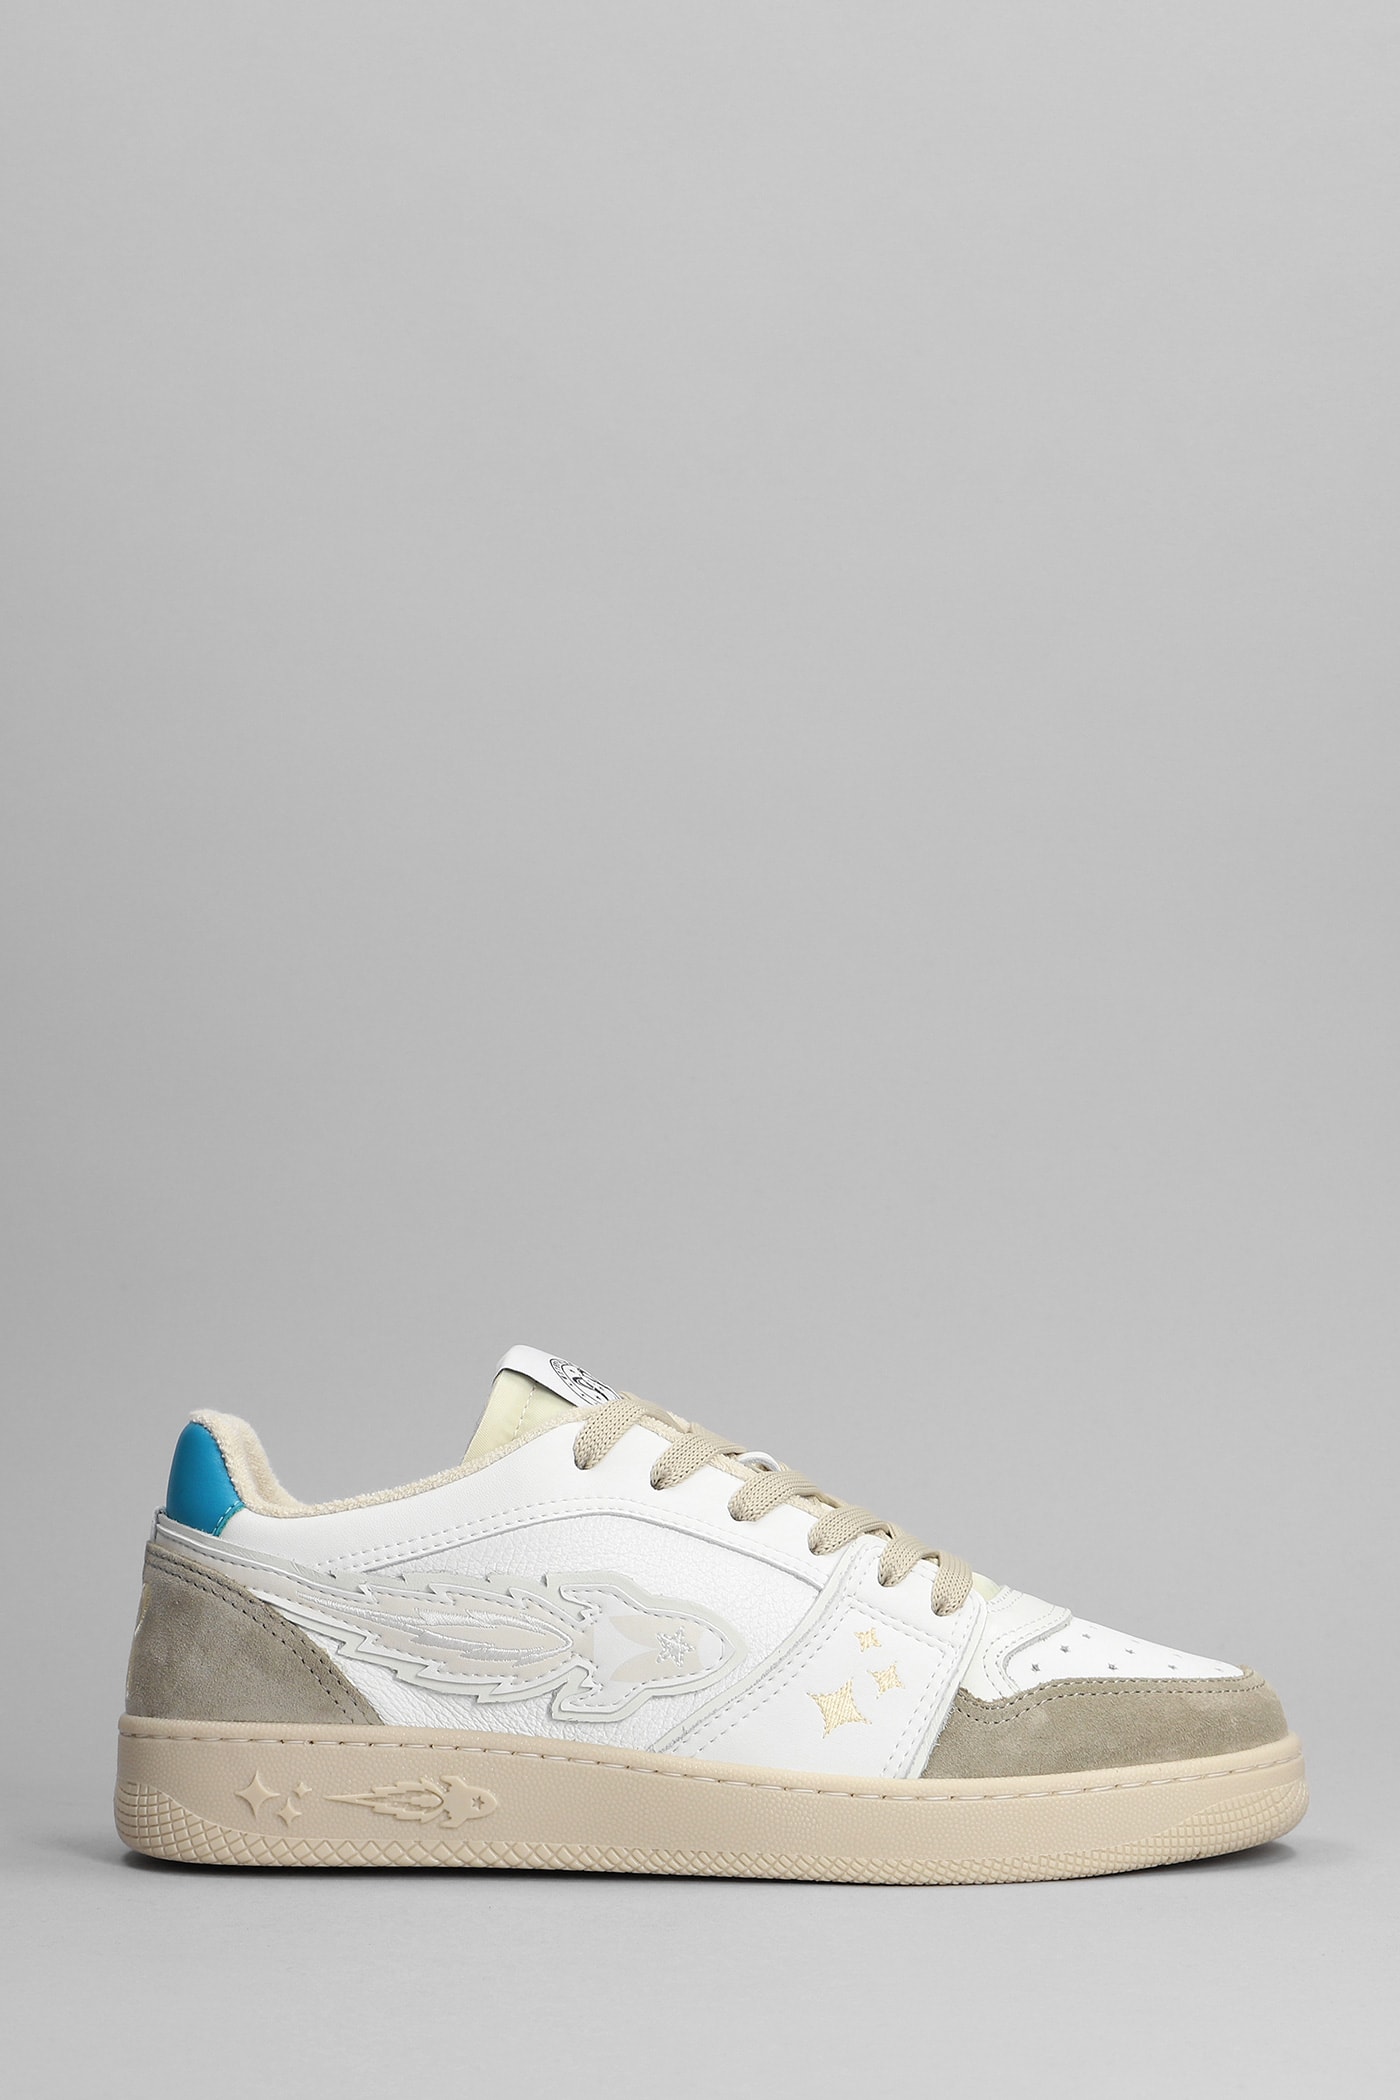 Enterprise Japan Sneakers In White Suede And Leather